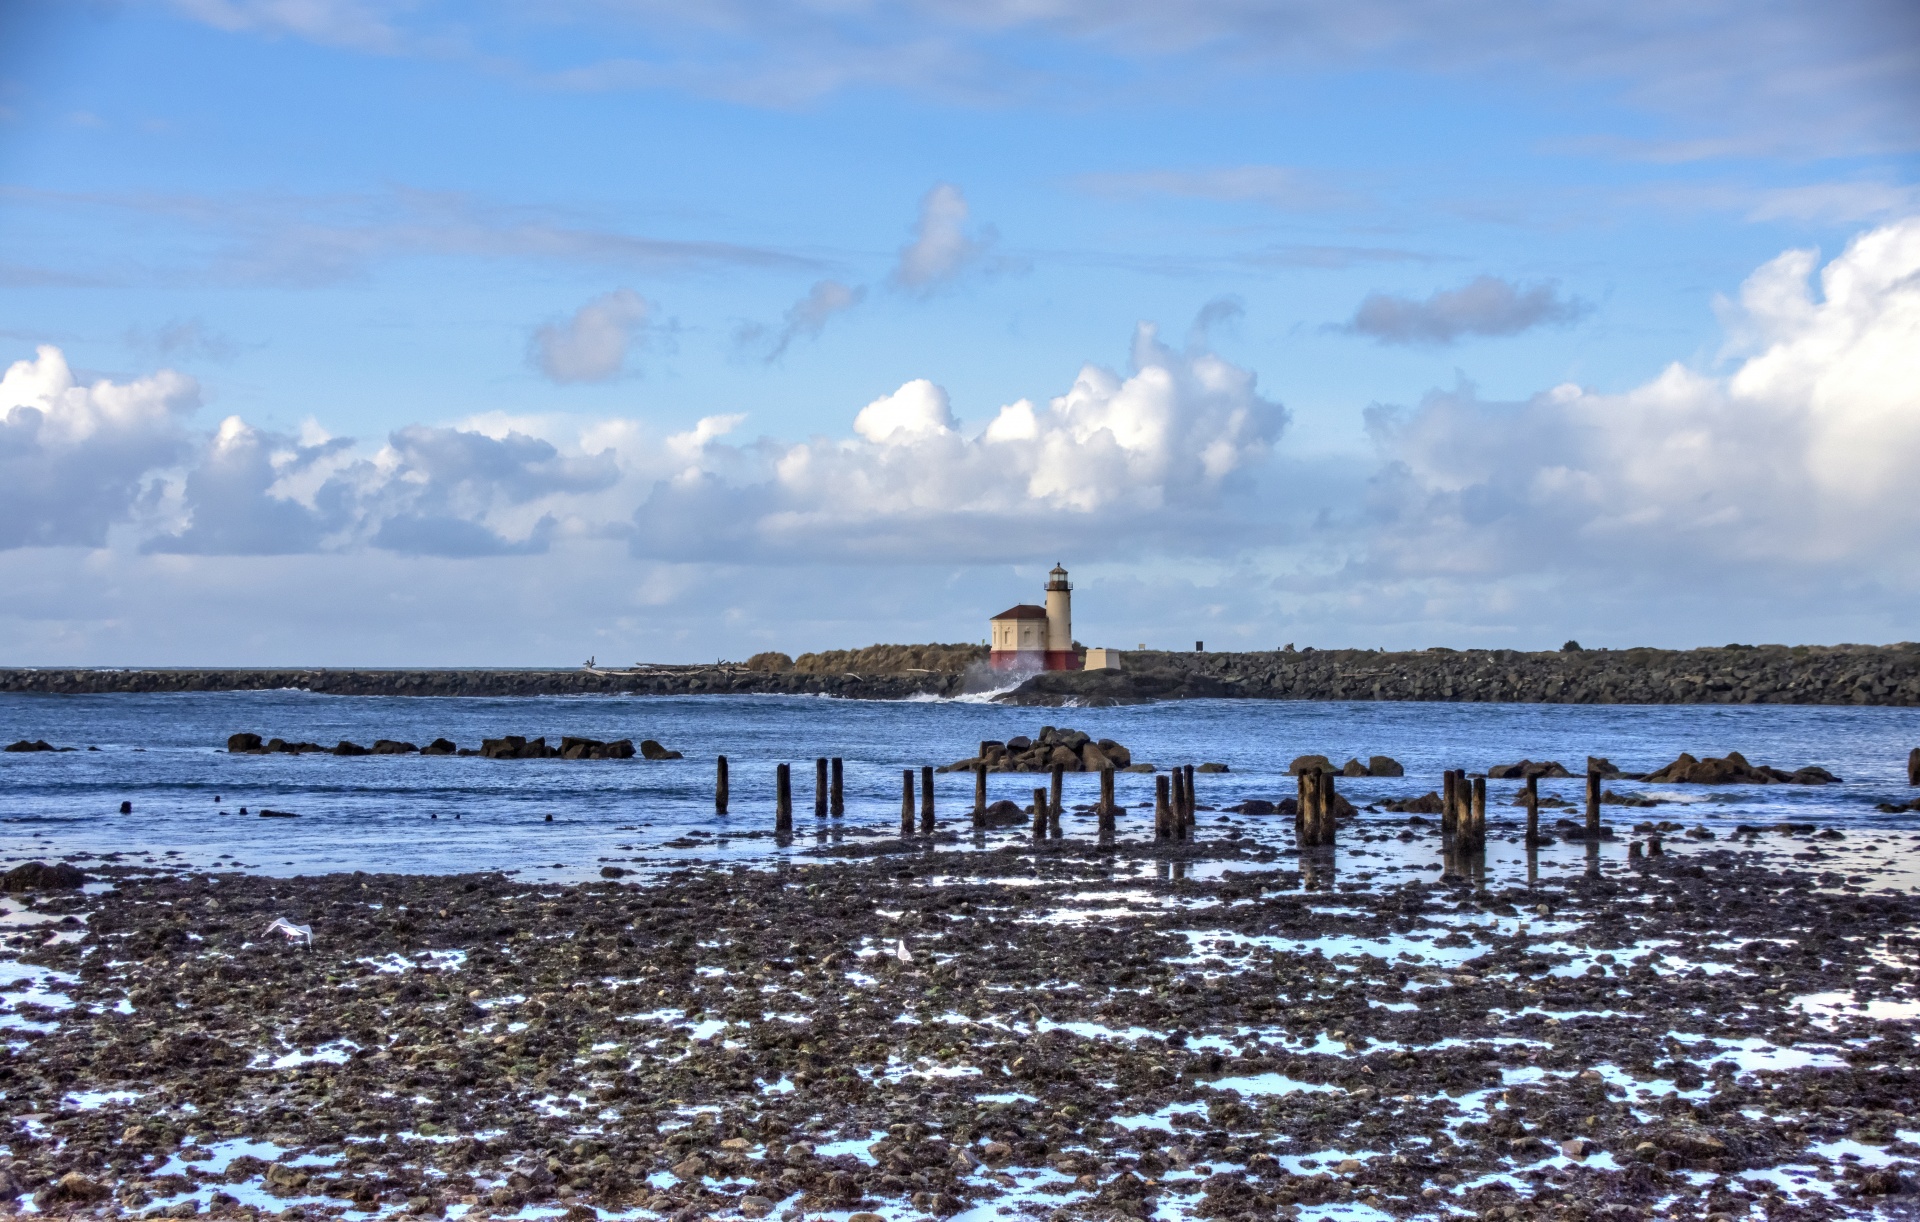 Looking across bay at low tide to a lighthouse